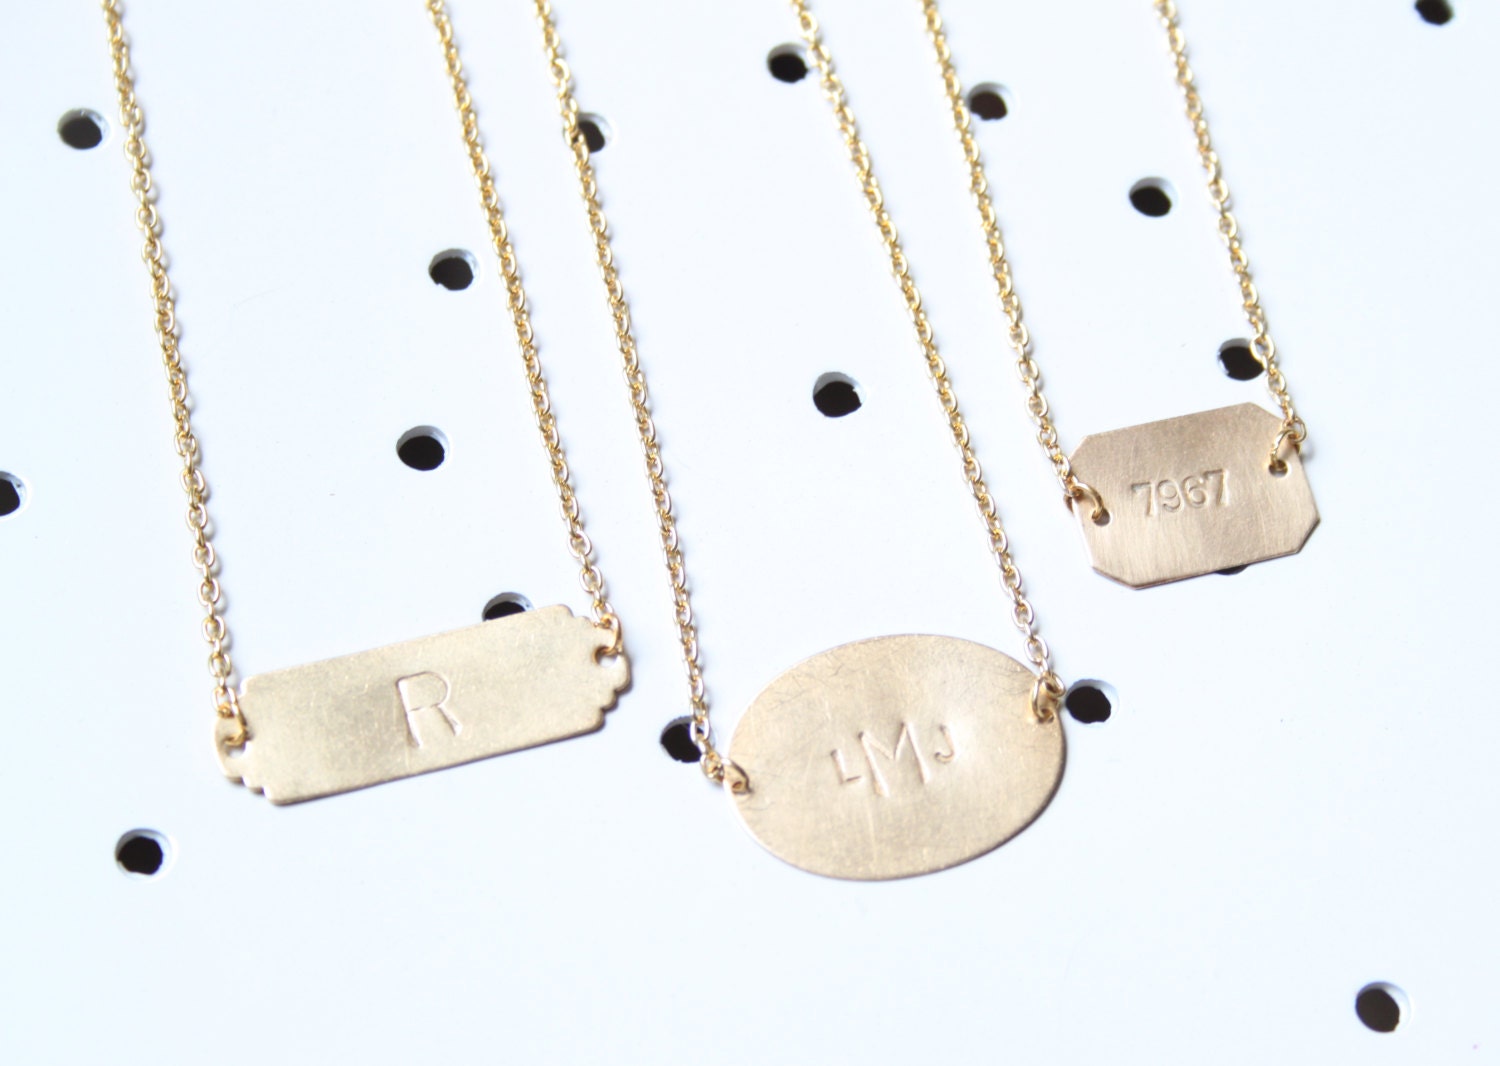 Personalized Bar Necklace, Initial Necklace, Monogram Necklace, Personalized Necklace, Custom Necklace, Monogram Necklace, Letter Necklace